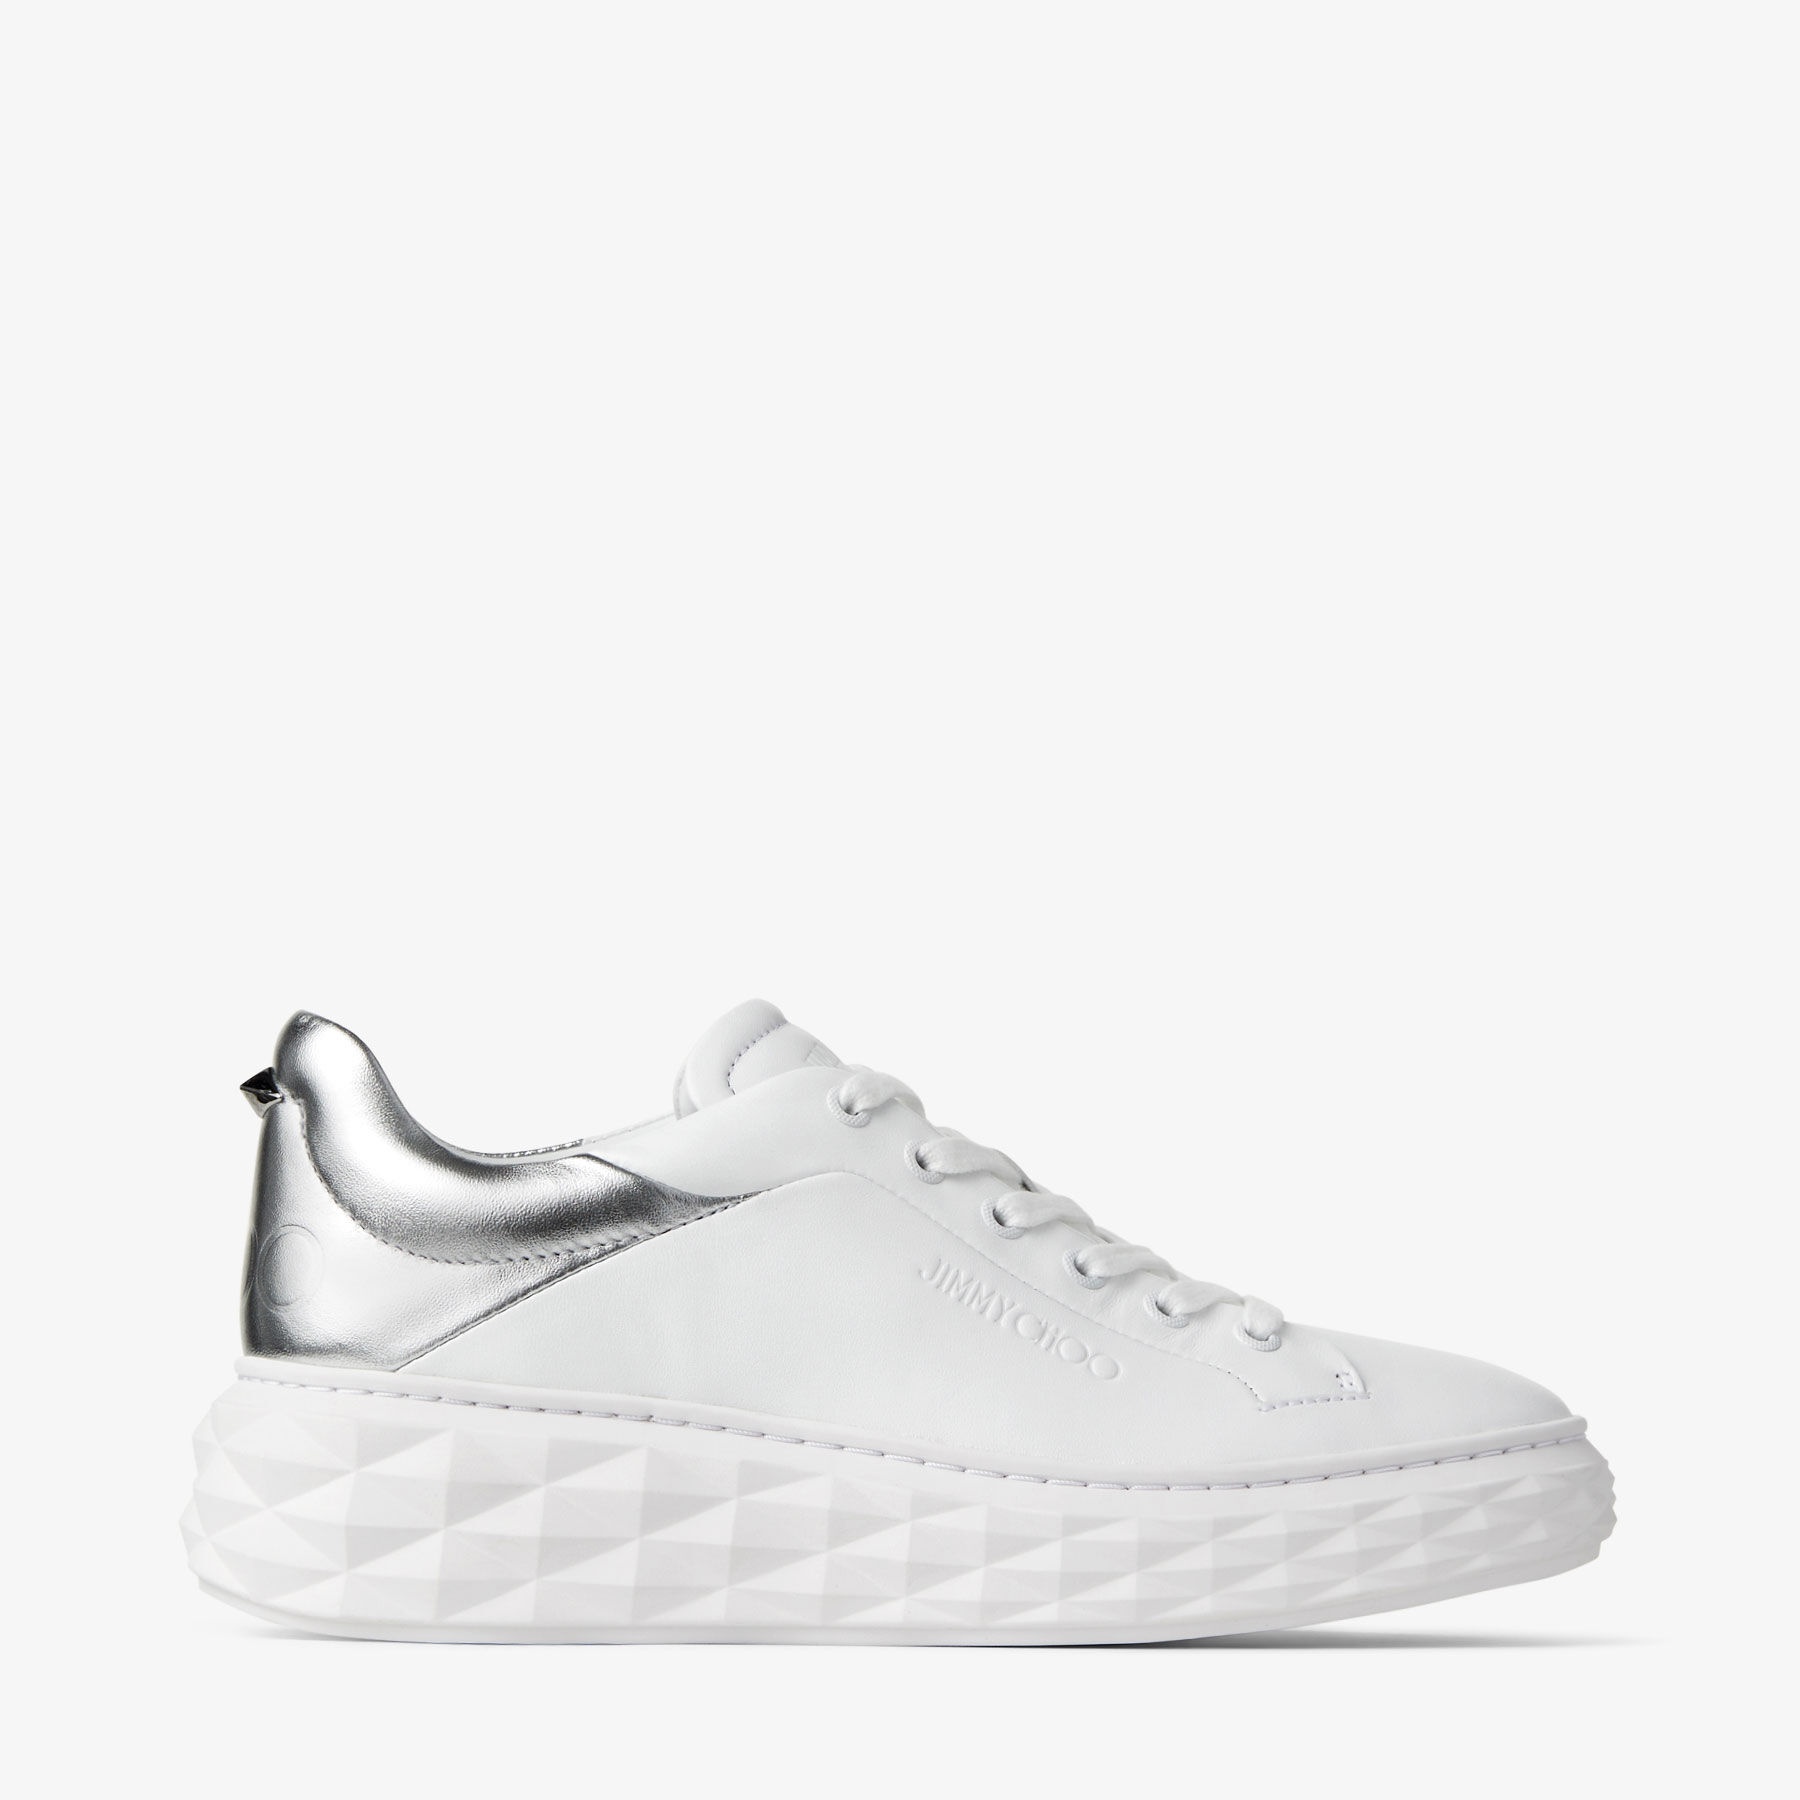 Diamond Maxi/f Ii
White and Silver Leather Trainers with Platform Sole - 1